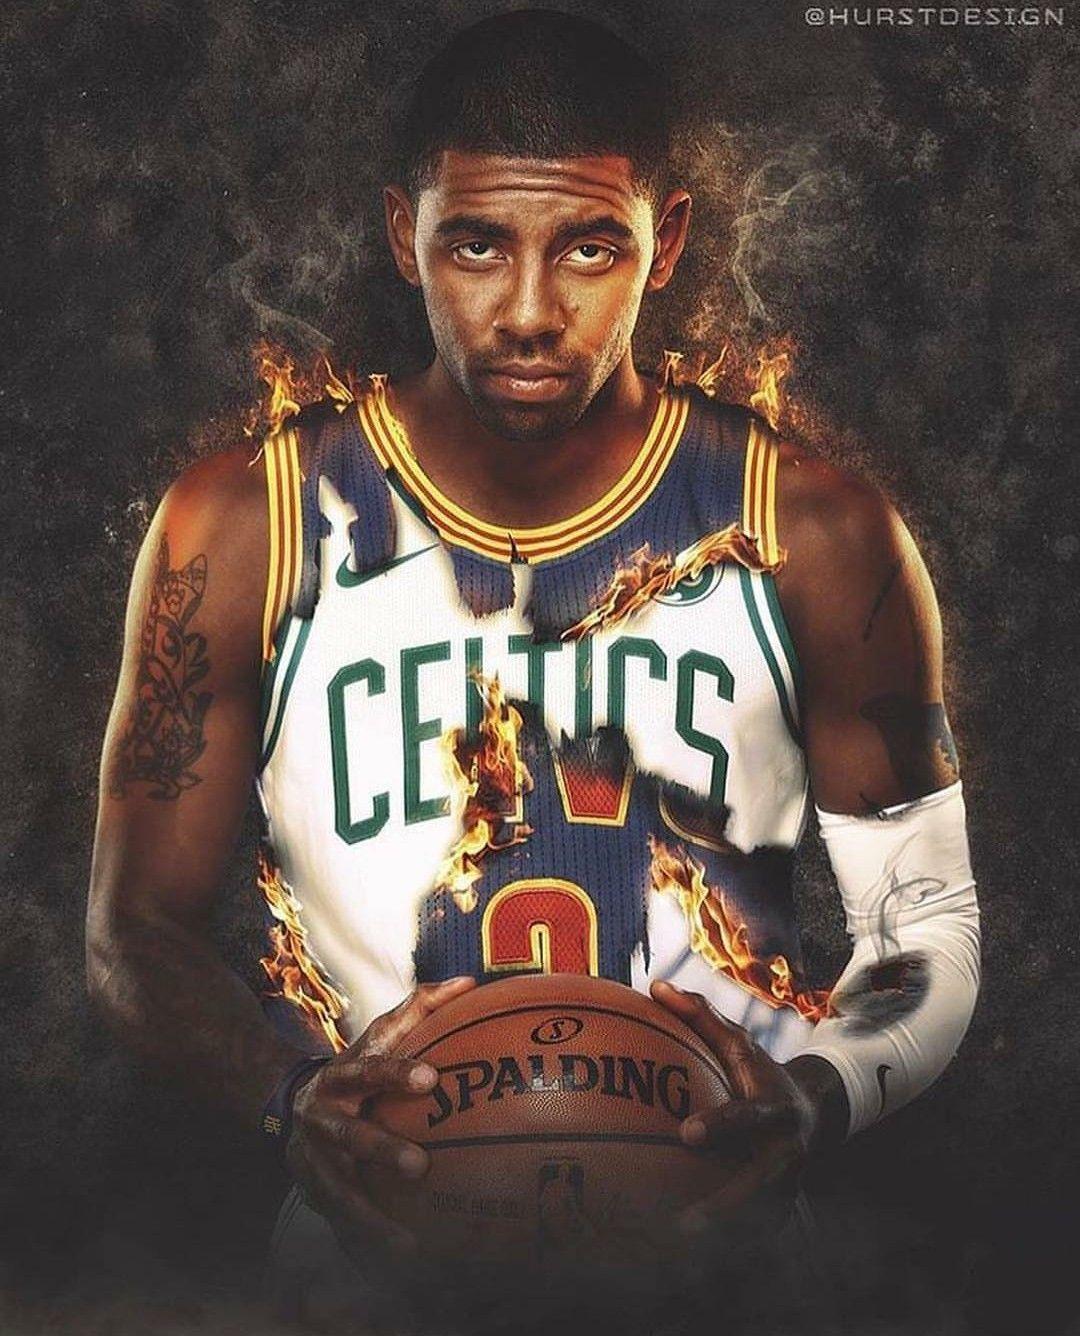 Kyrie Irving edit from Cavaliers to Celtics....well I don't like